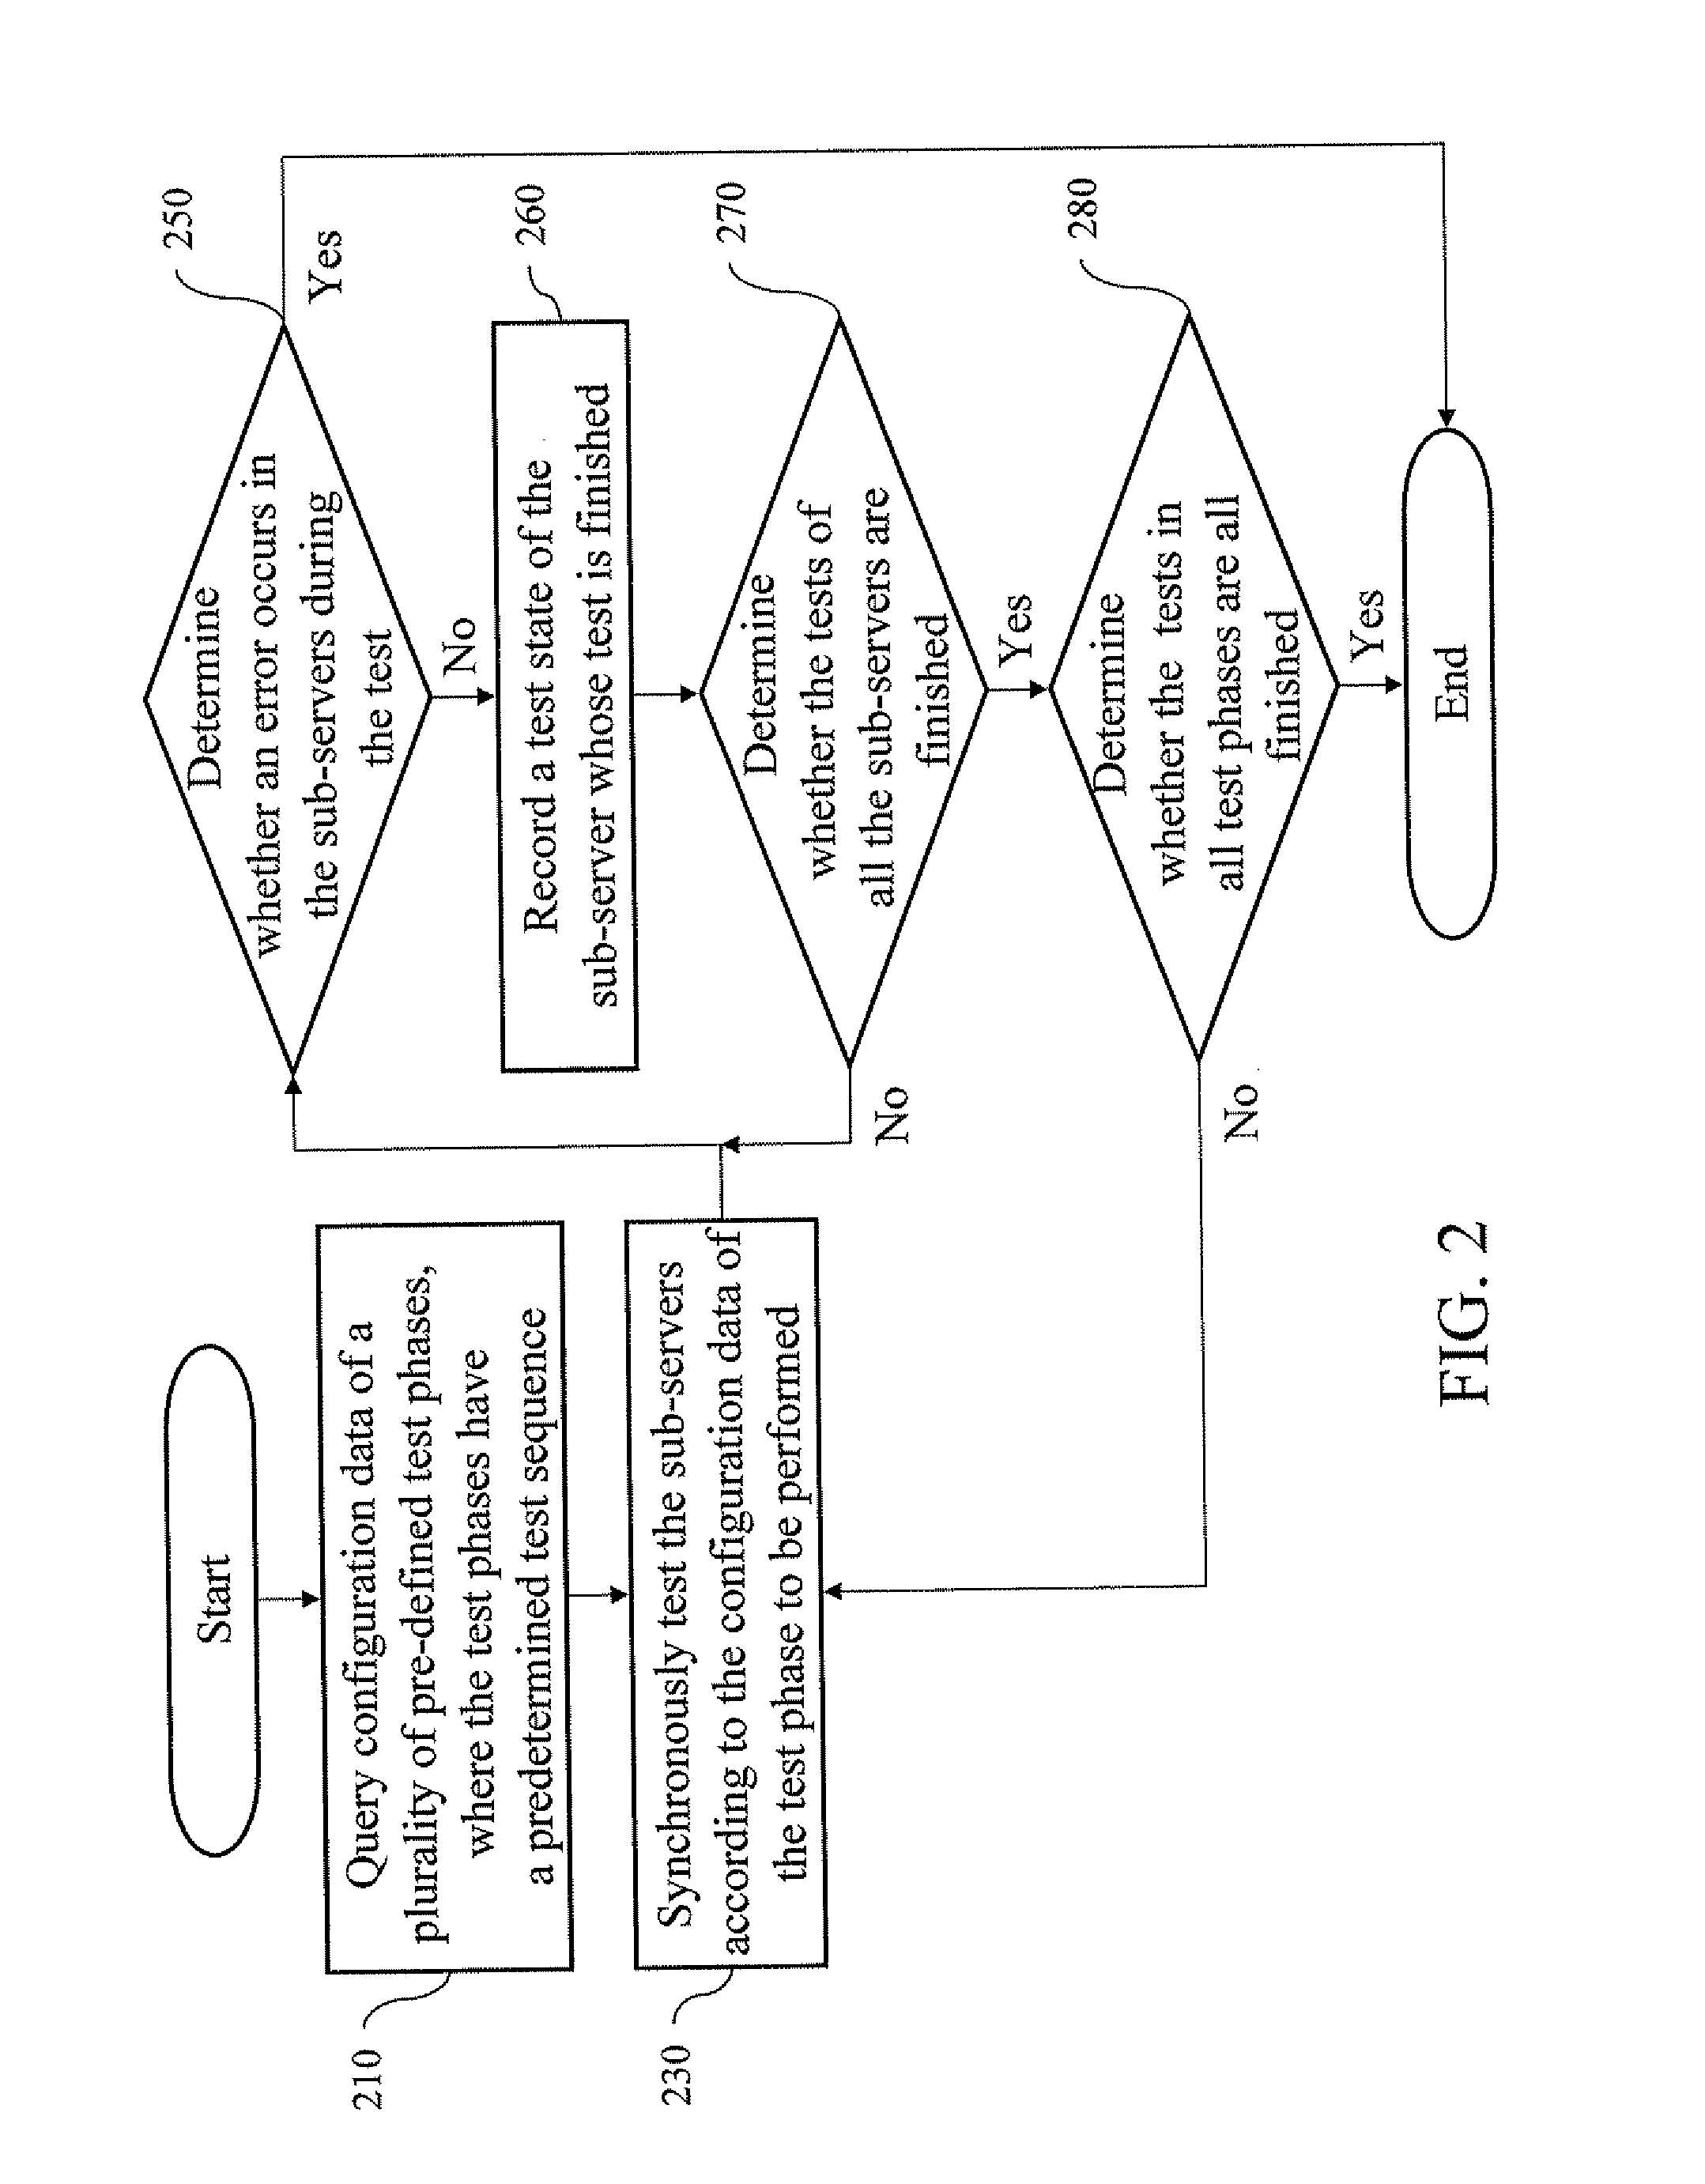 System and method for testing sub-servers through plurality of test phases